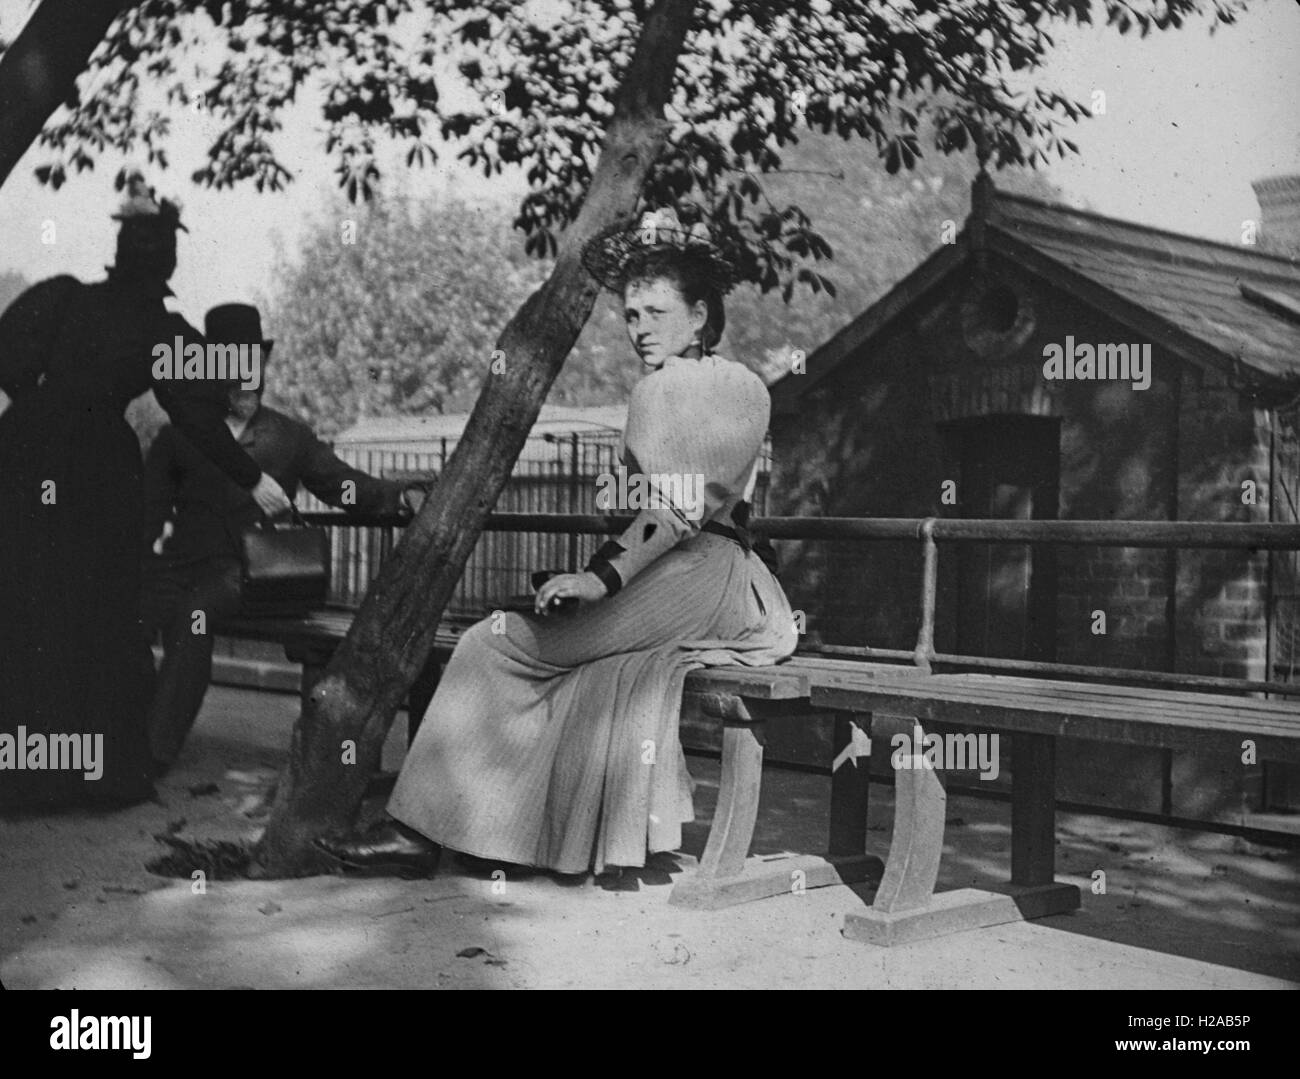 Candid portrait of a stunning young woman in hat and dress design with pooled natural lighting sitting on a bench. Amateur holiday photos c1899, venue appears to be Hastings. Photo by Tony Henshaw  .  early original glass slides (original positive images). FROM THE 1899 HASTINGS FAMILY COLLECTION Stock Photo